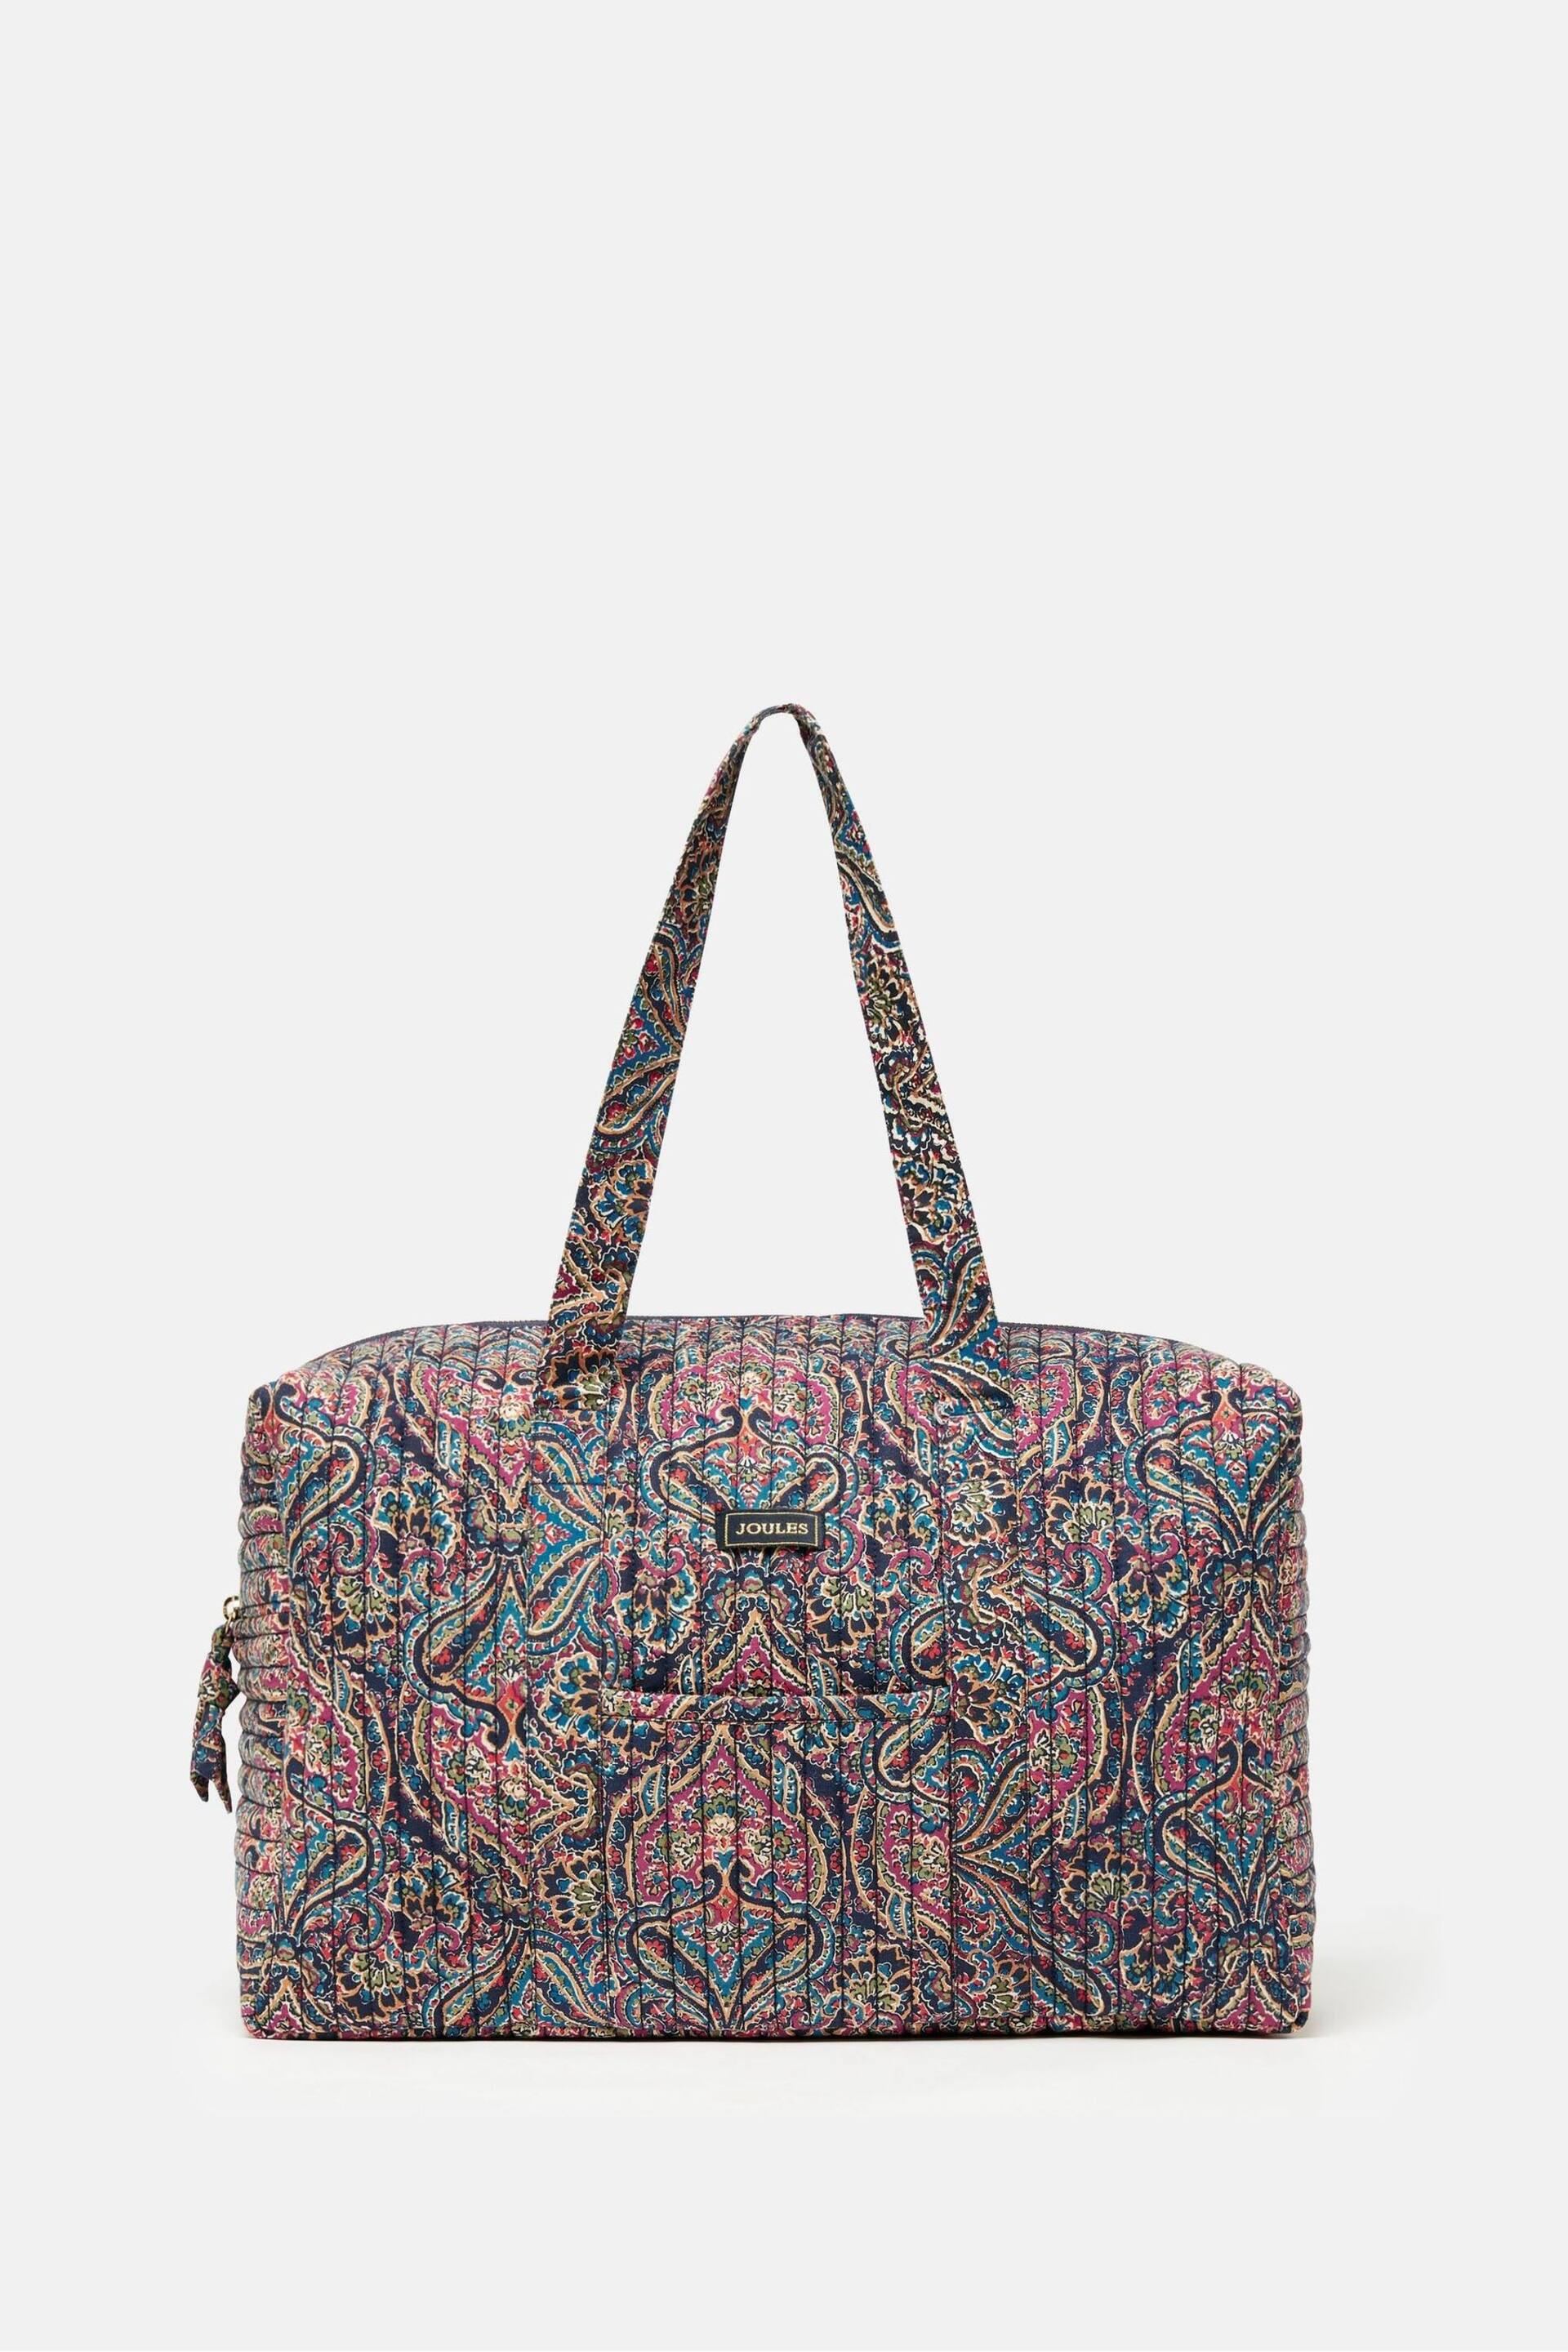 Joules Dolly Paisley Print Weekend Bag - Image 4 of 8